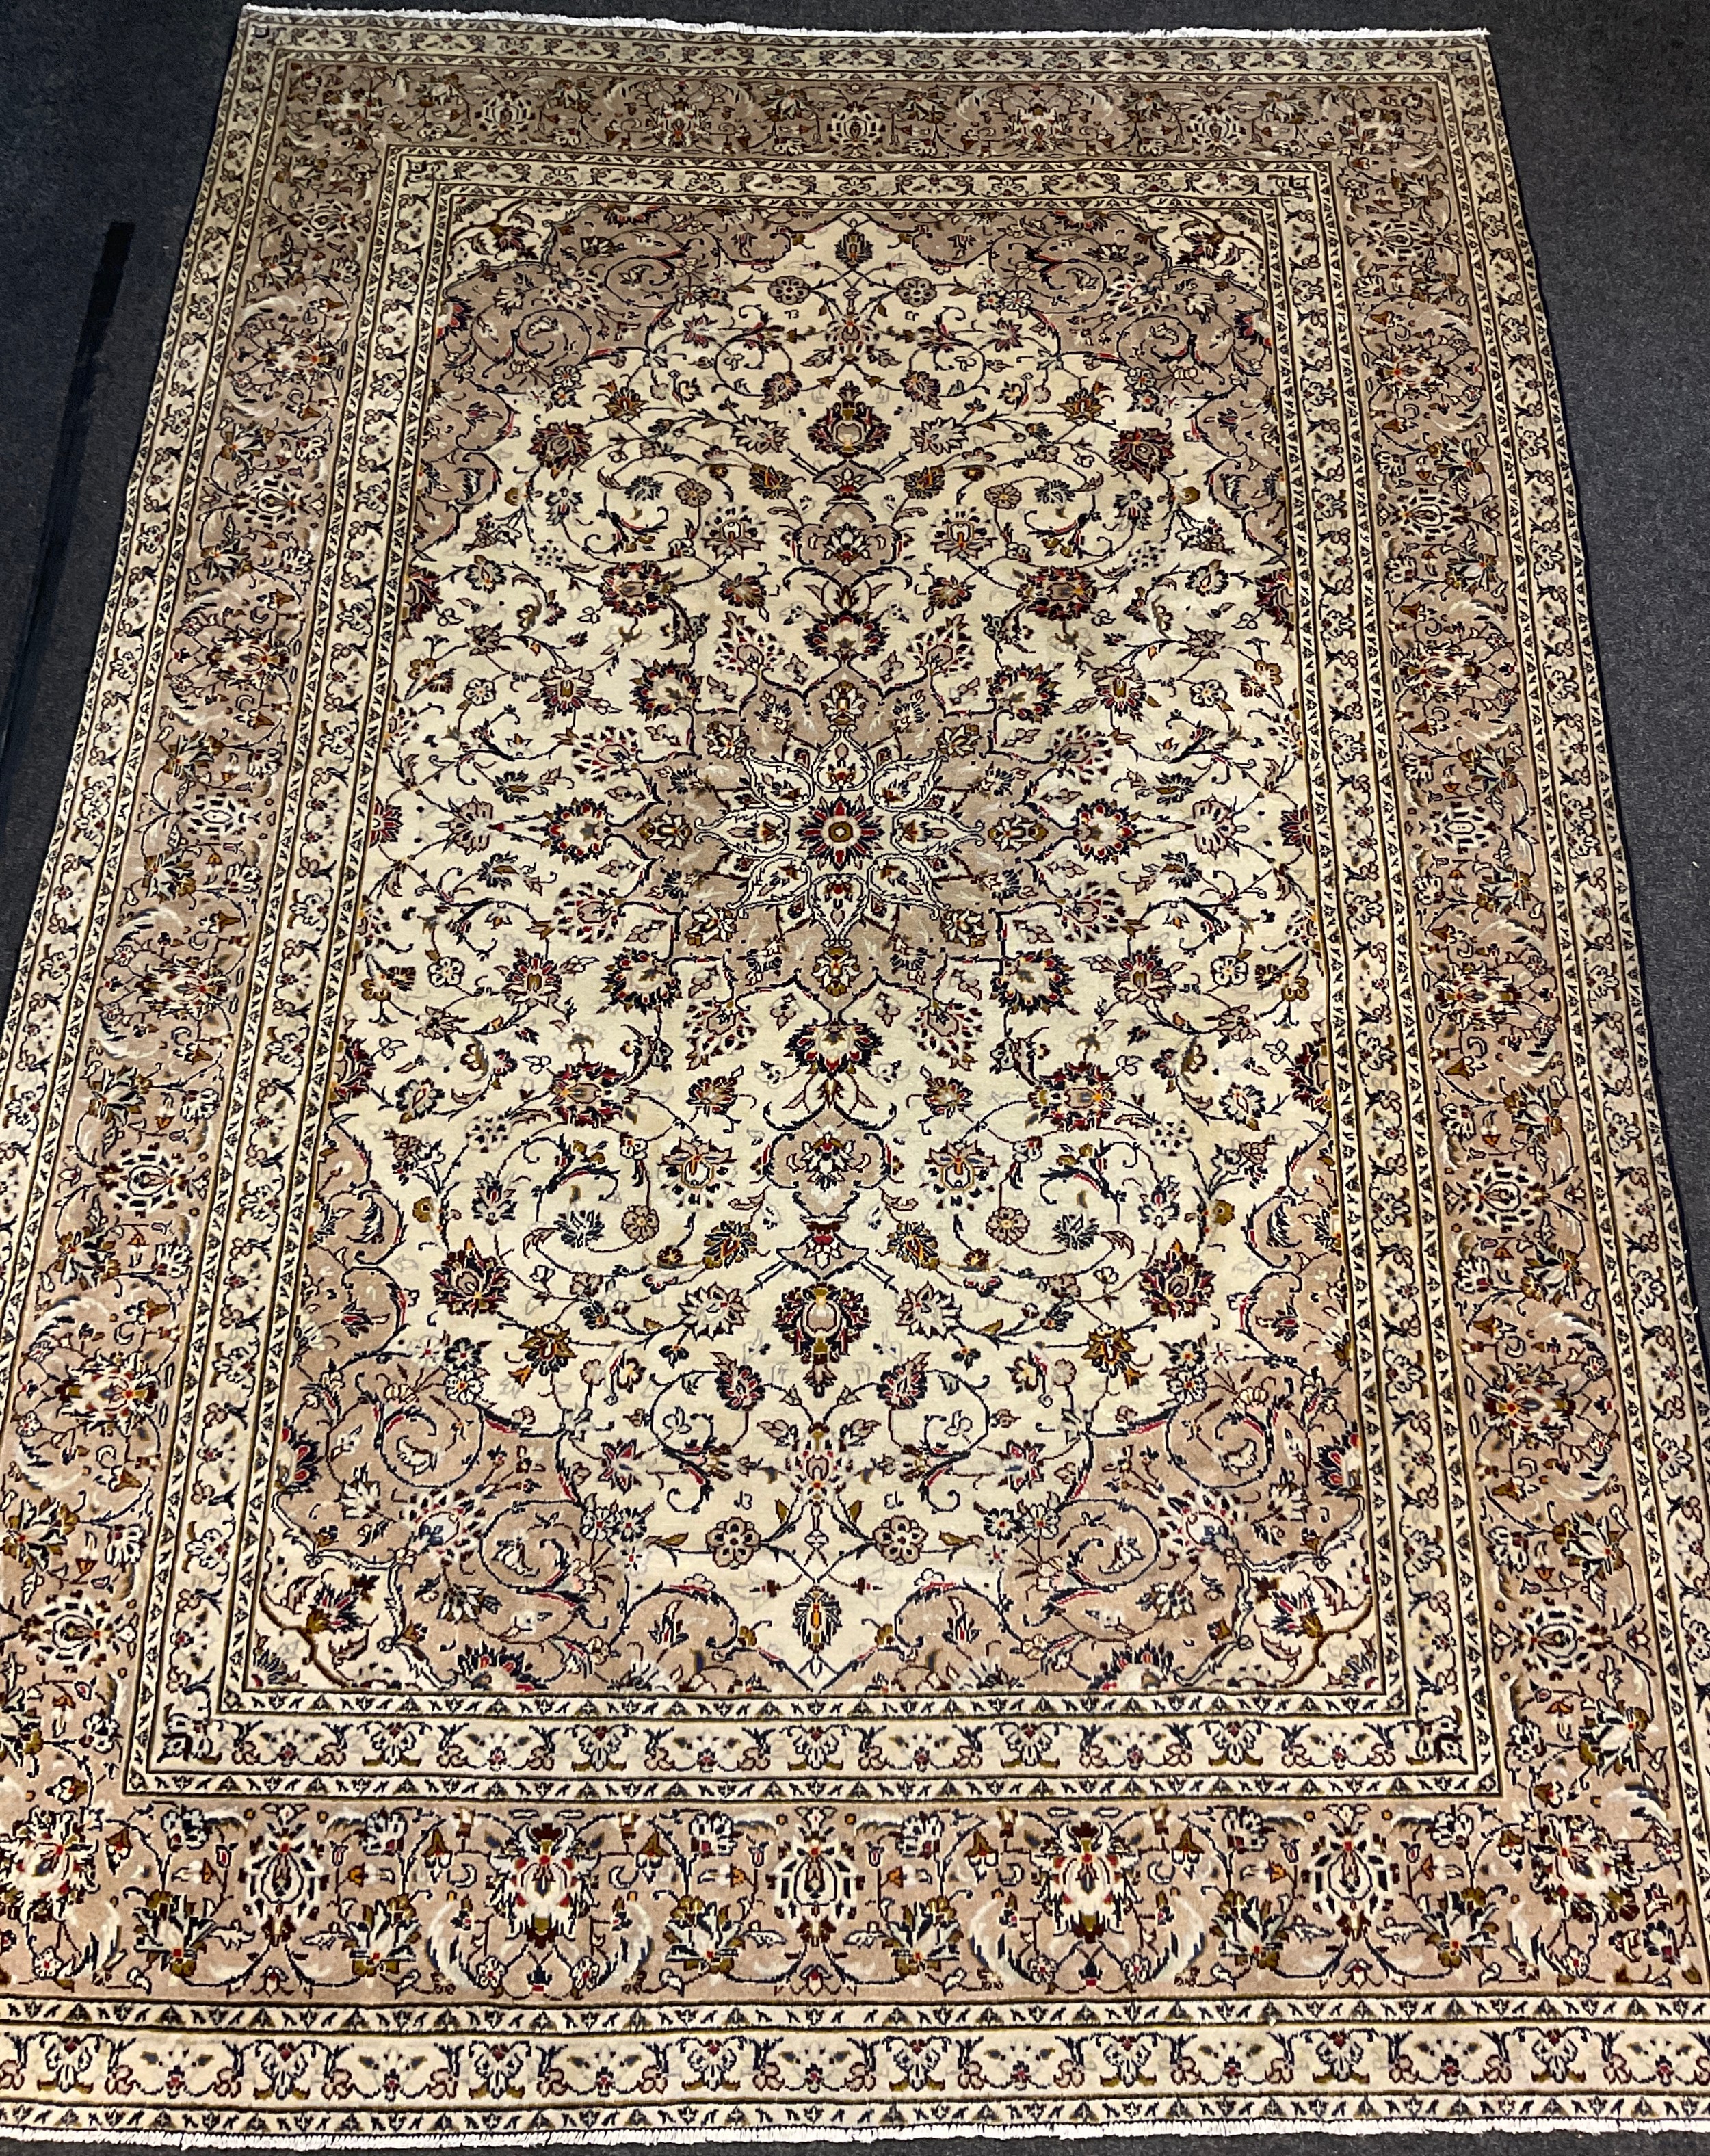 A Persian Kashan rug / carpet, knotted with a lotus-form circular medallion within a field of